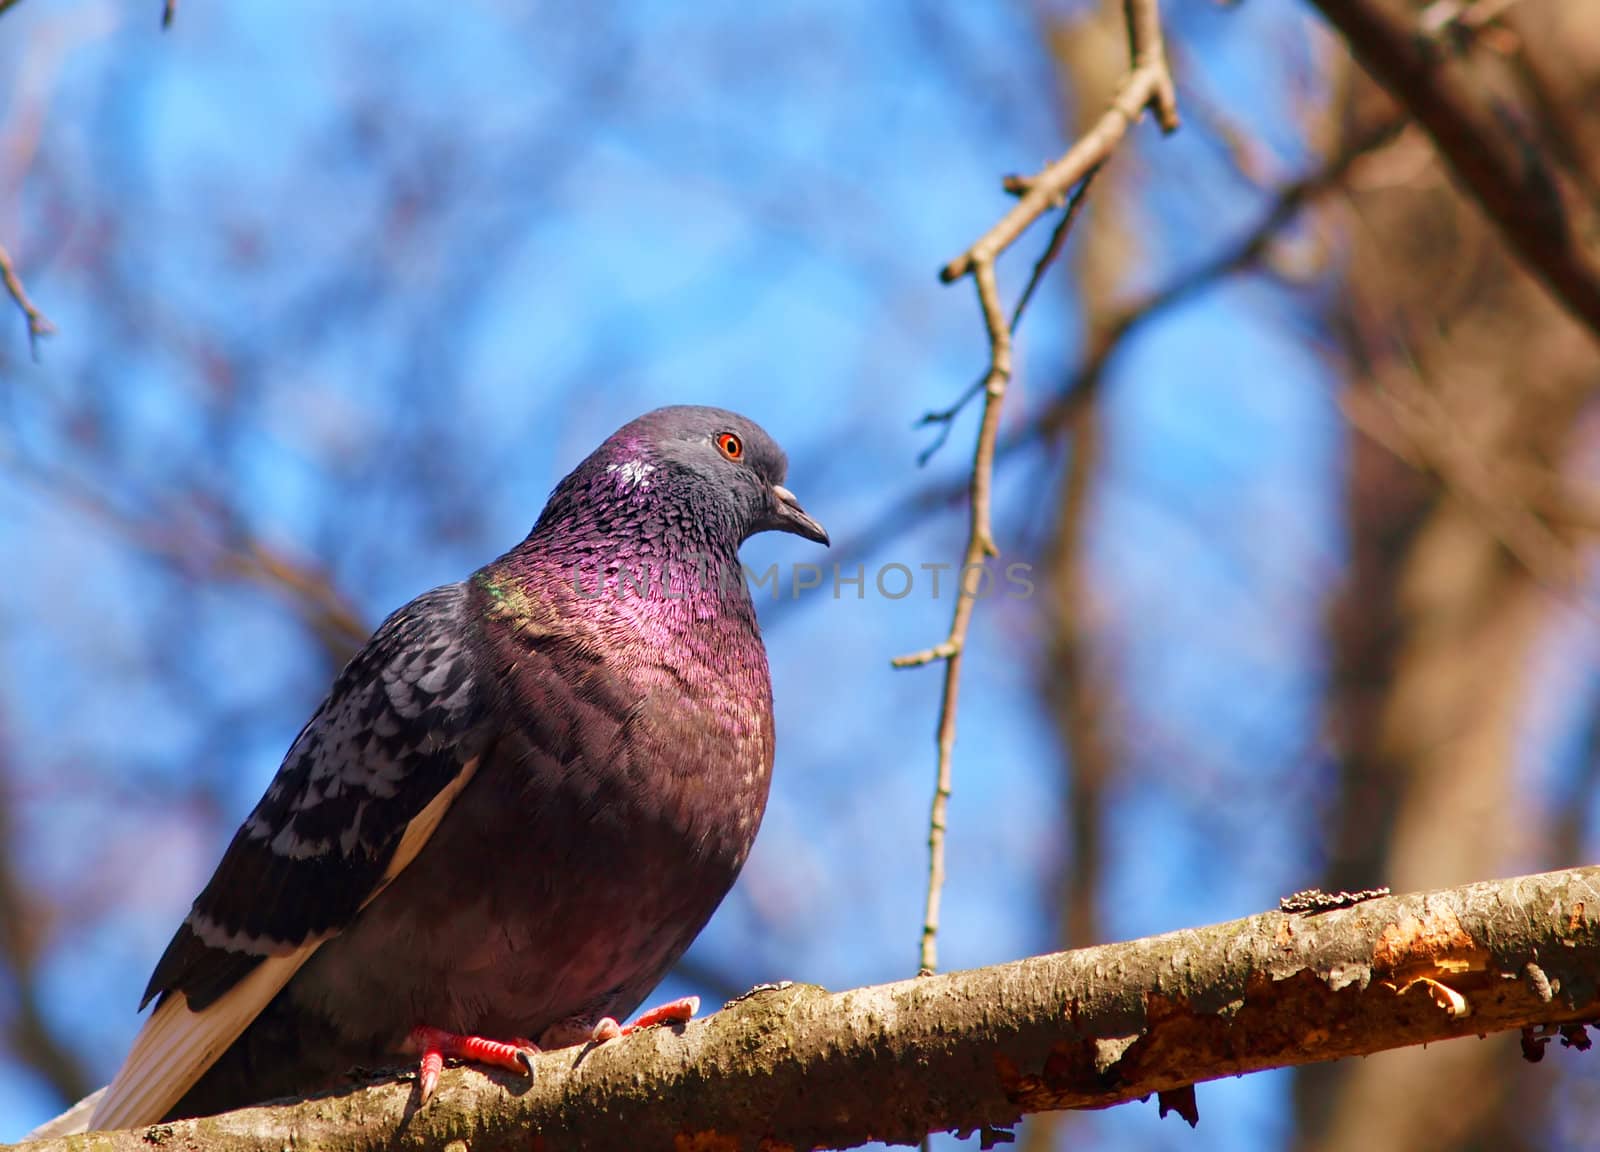 Colorful pigeon in a tree watching out in the forest